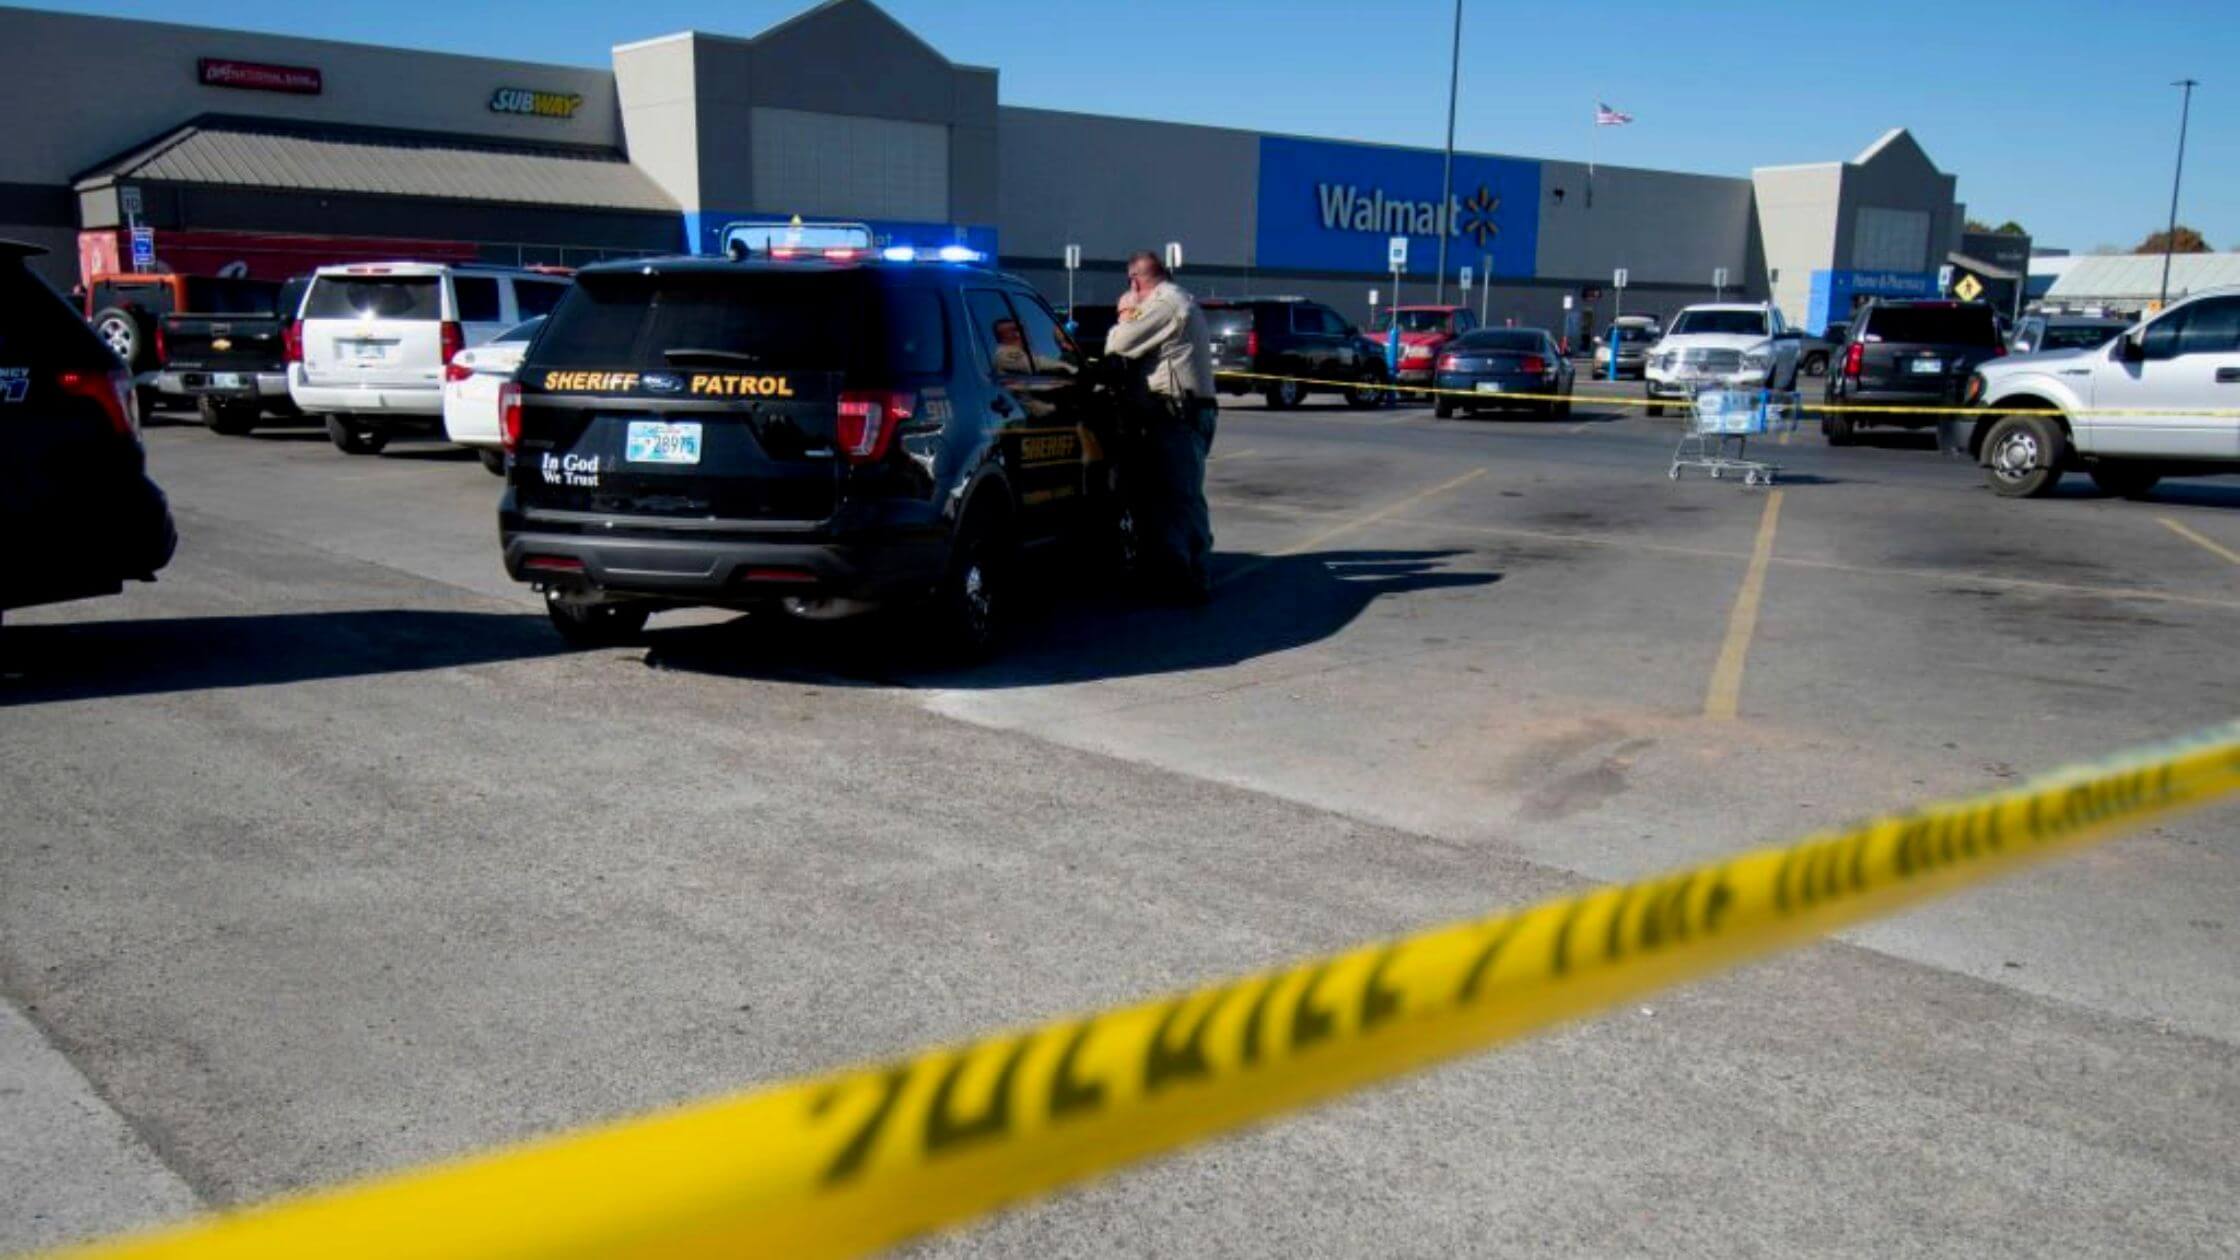 'Bodies Drop' As A Walmart Manager Kills Six People In An Incident In Virginia